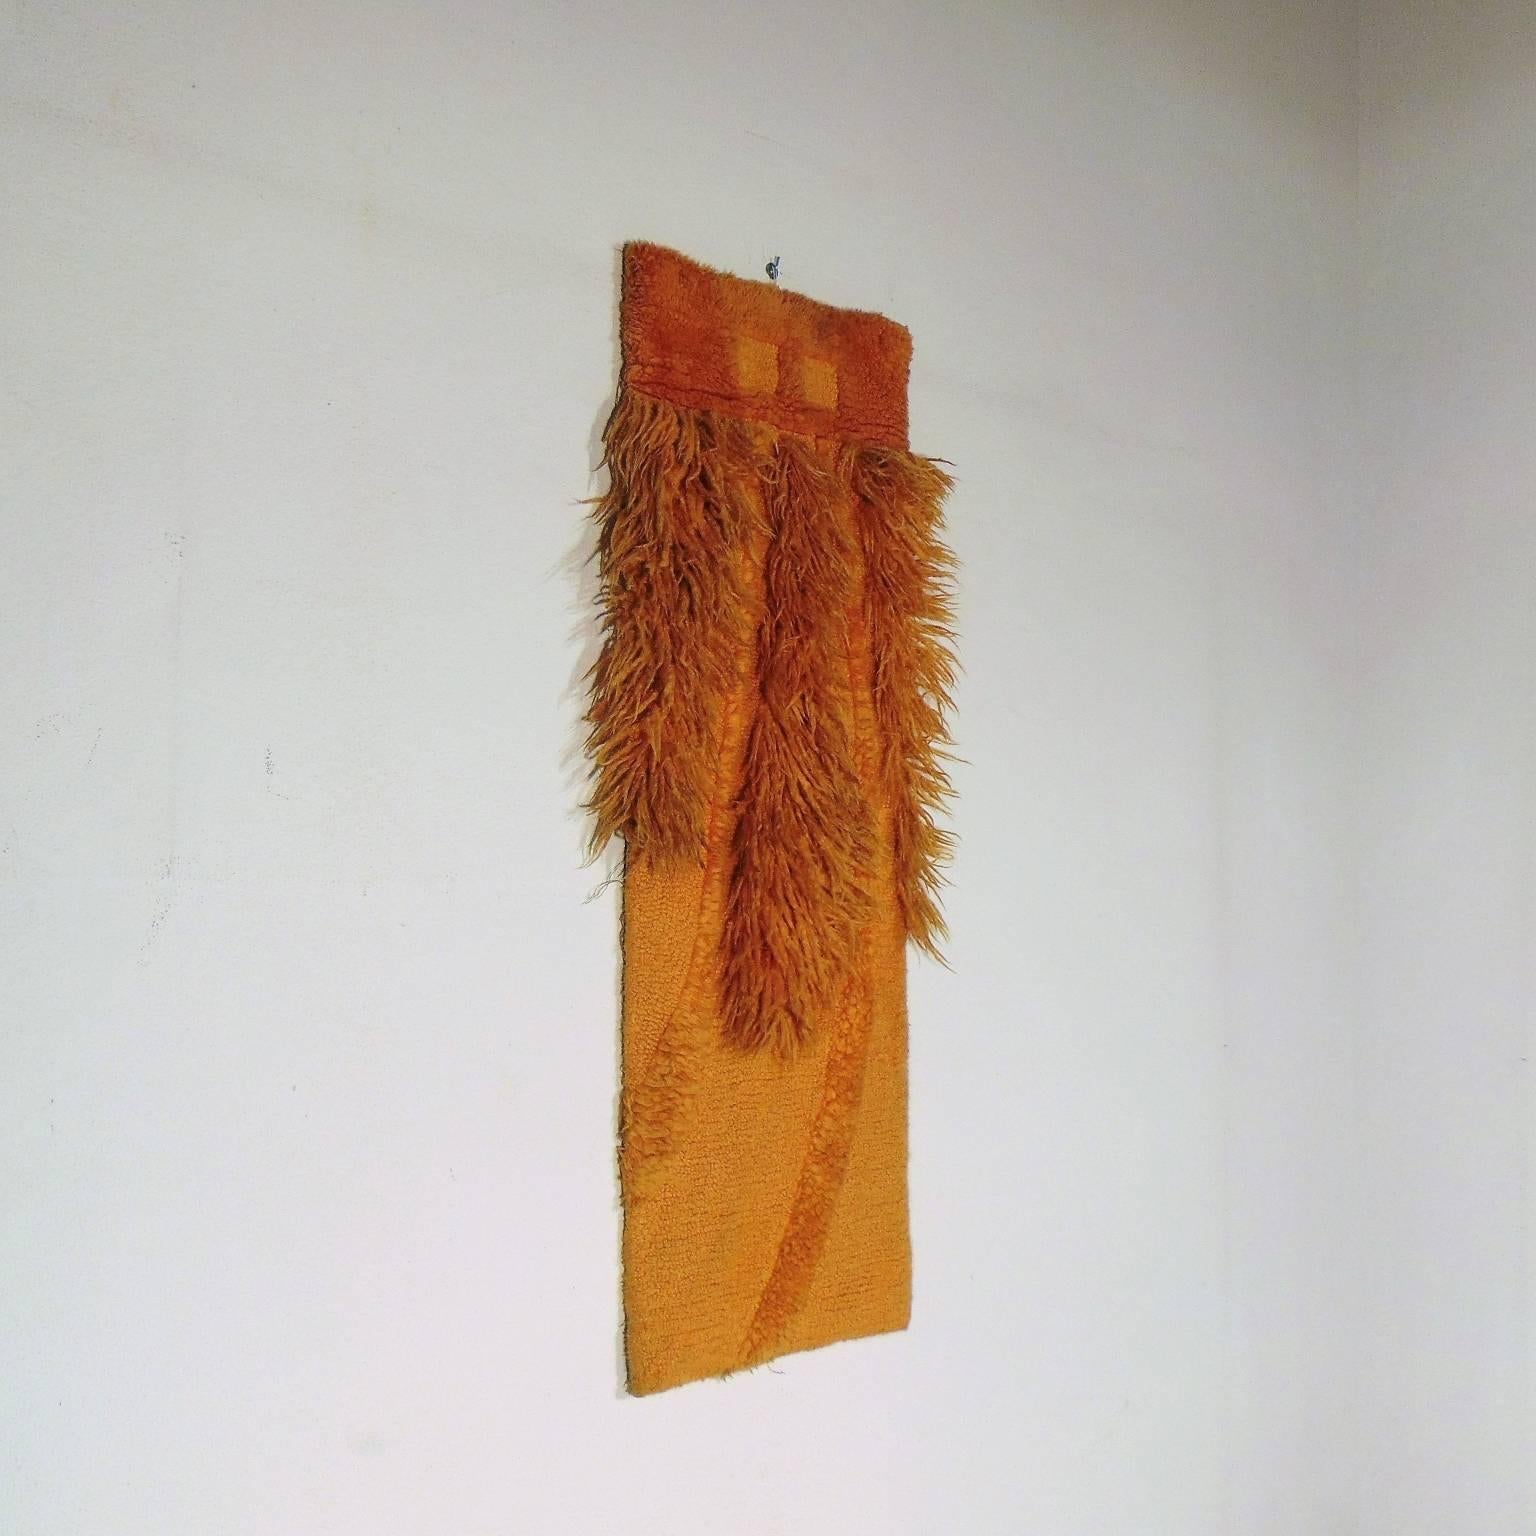 Handwoven tapestry by famous artist Ewald Kroener, who set up a weaving facility in renowned Schloss Hackhausen, the perfect setting for his artwork.
This woollen handicraft is in a warm orange wool, measures cm 125 in height and 44 in width (ft.